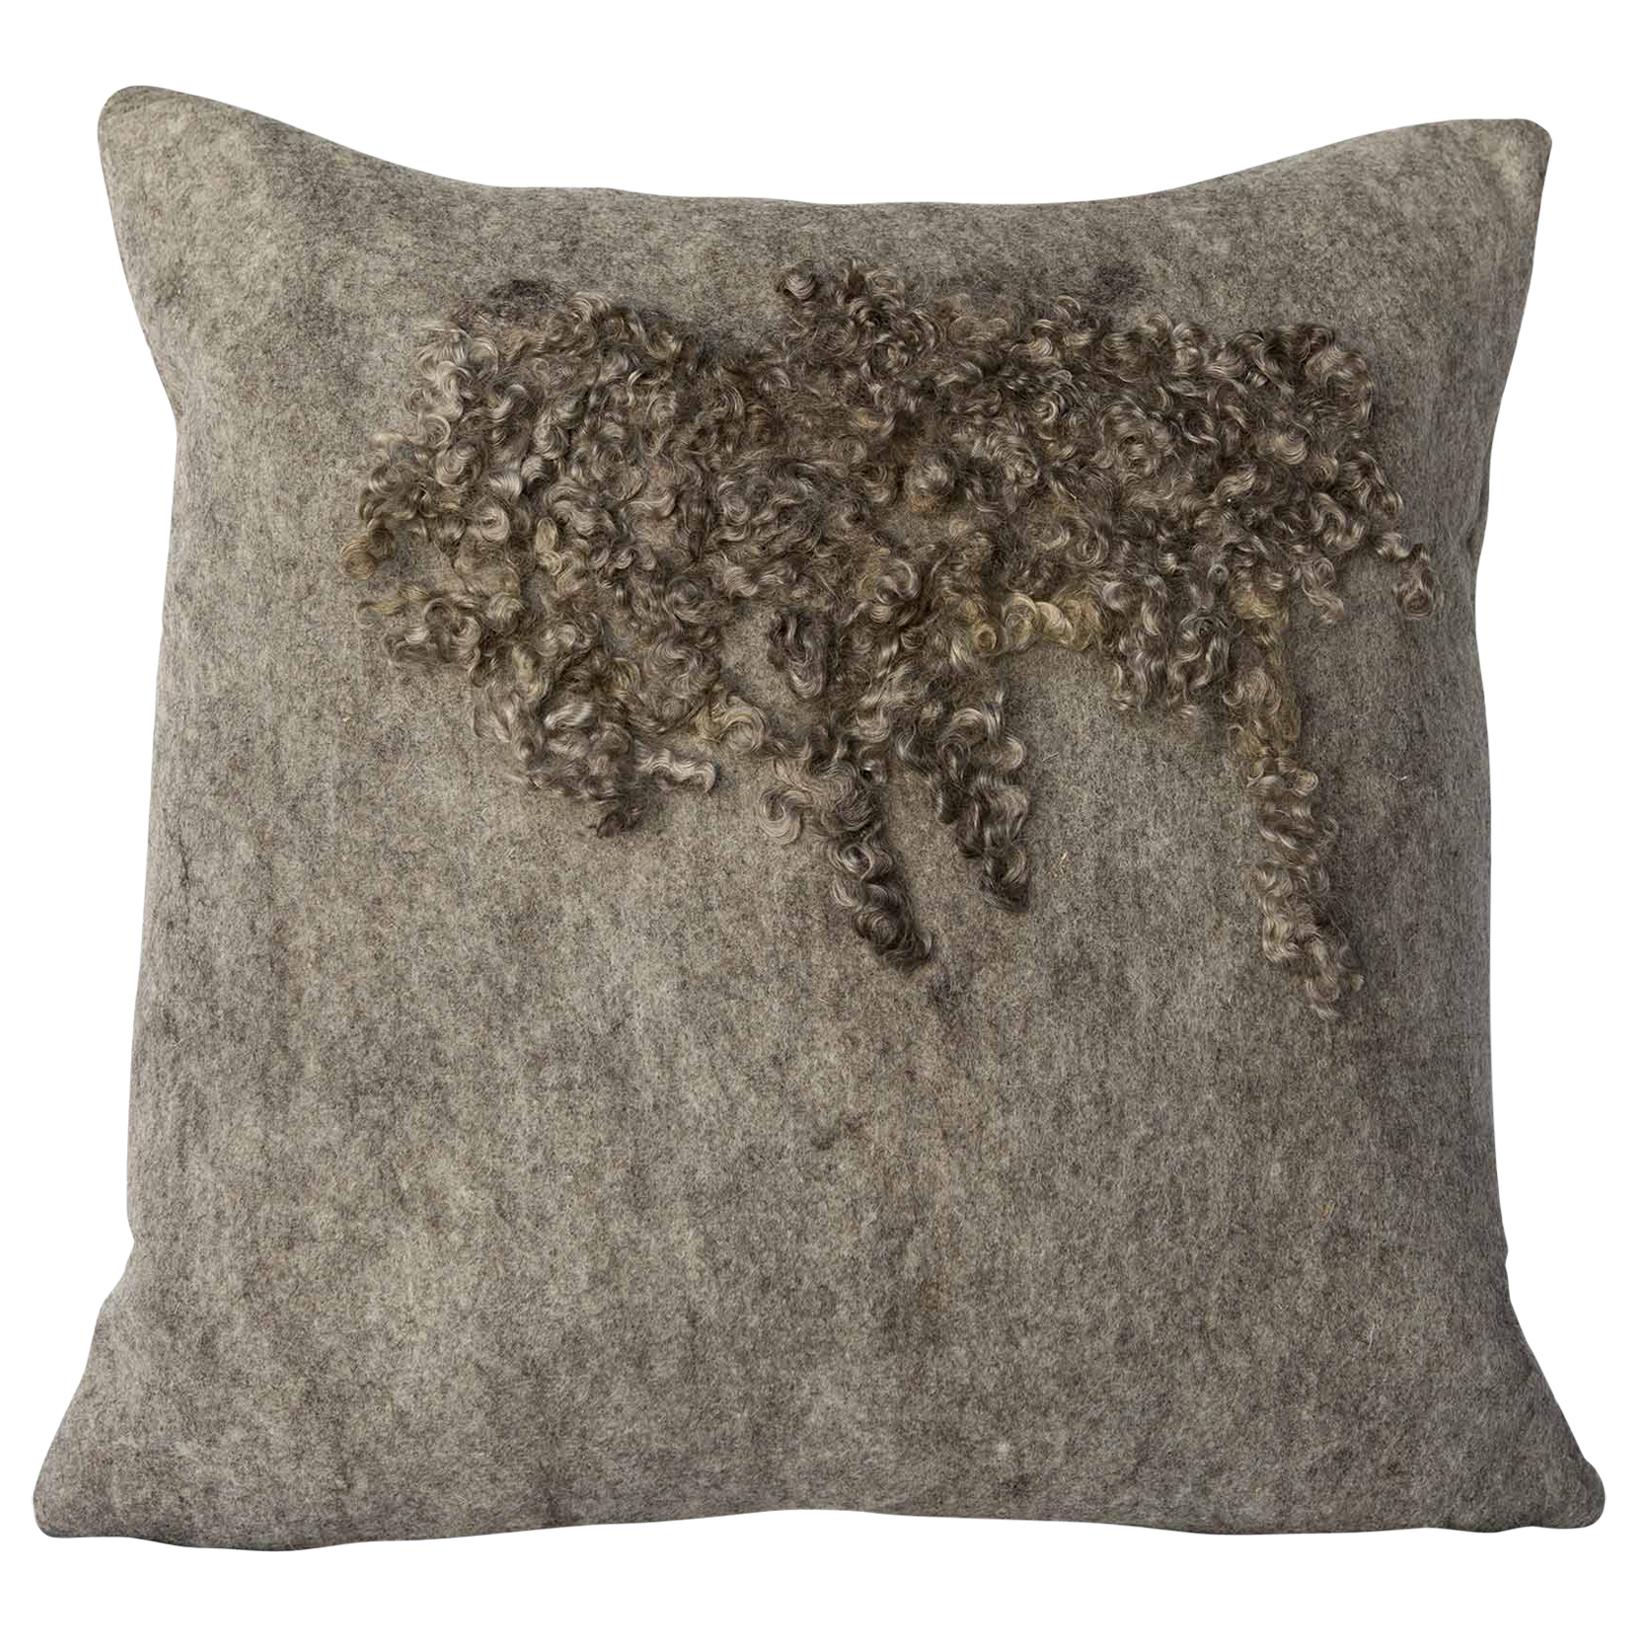 Wool Wensleydale Throw Pillow, Gray, Heritage Sheep Collection